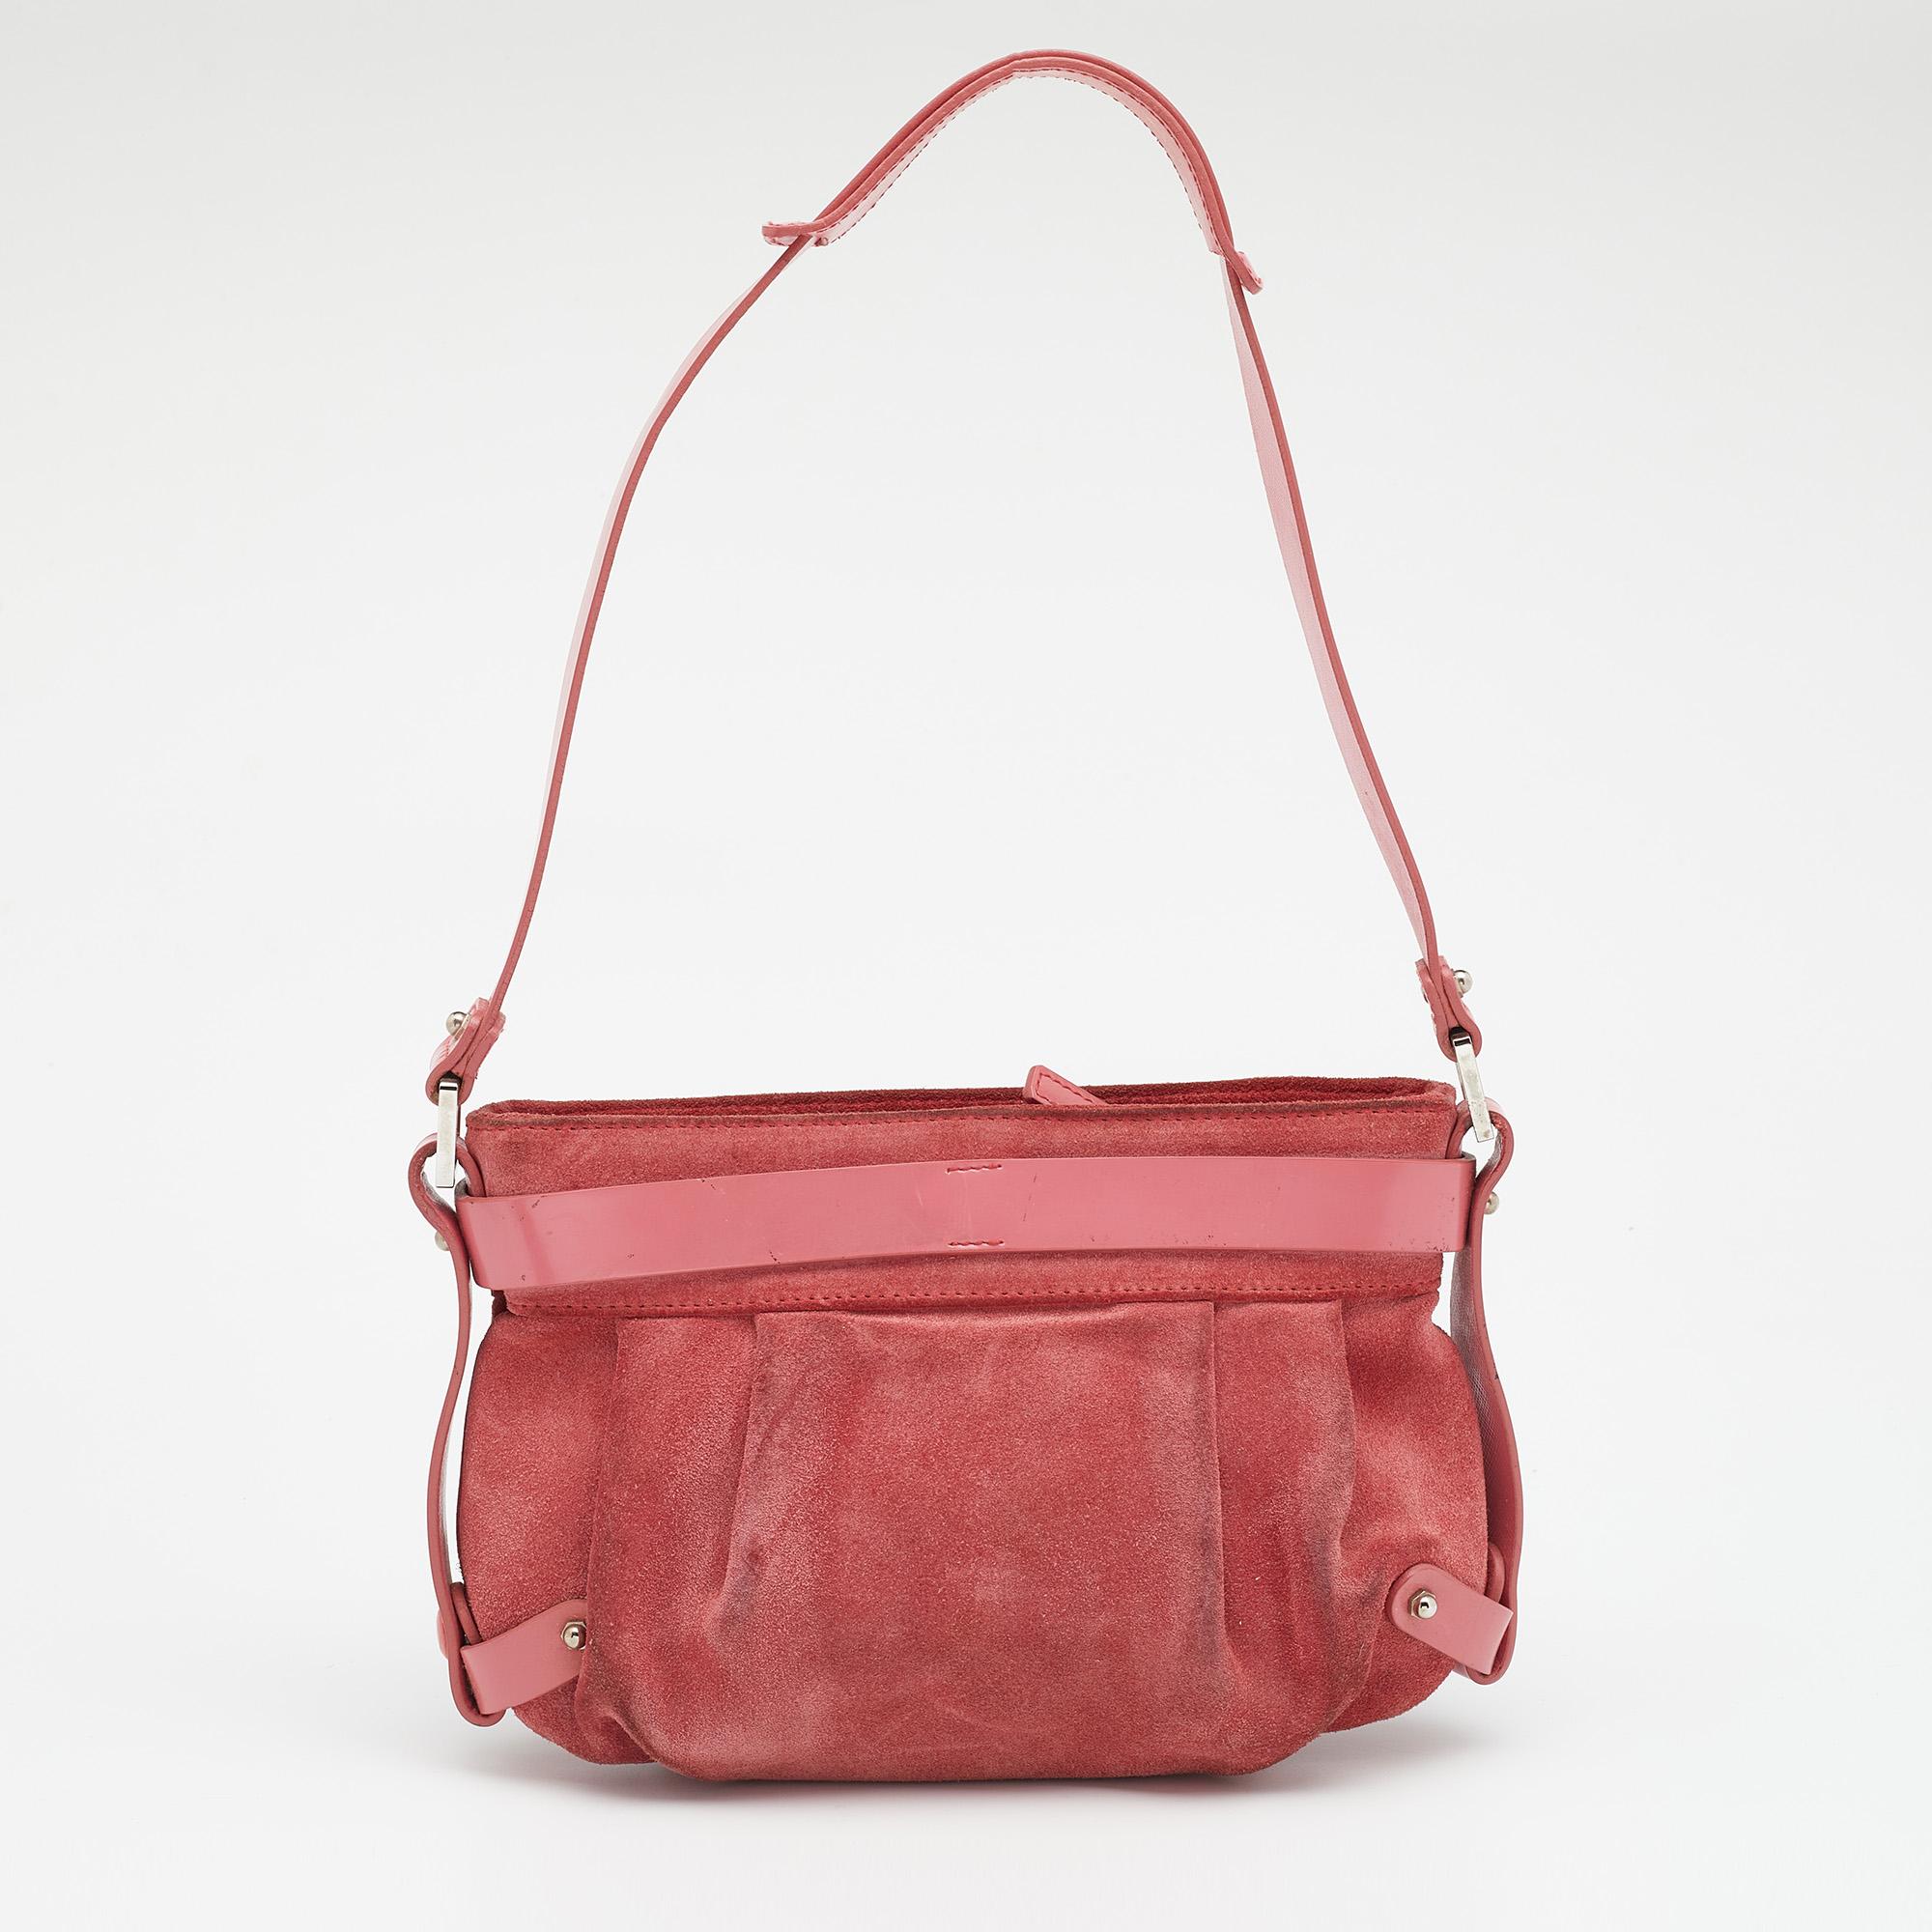 This shoulder bag from Salvatore Ferragamo has been designed to be a worthy style companion! Crafted from suede and leather, the pretty pink bag features the brand's famous Gancio detail on the front. It is equipped with a single handle and a